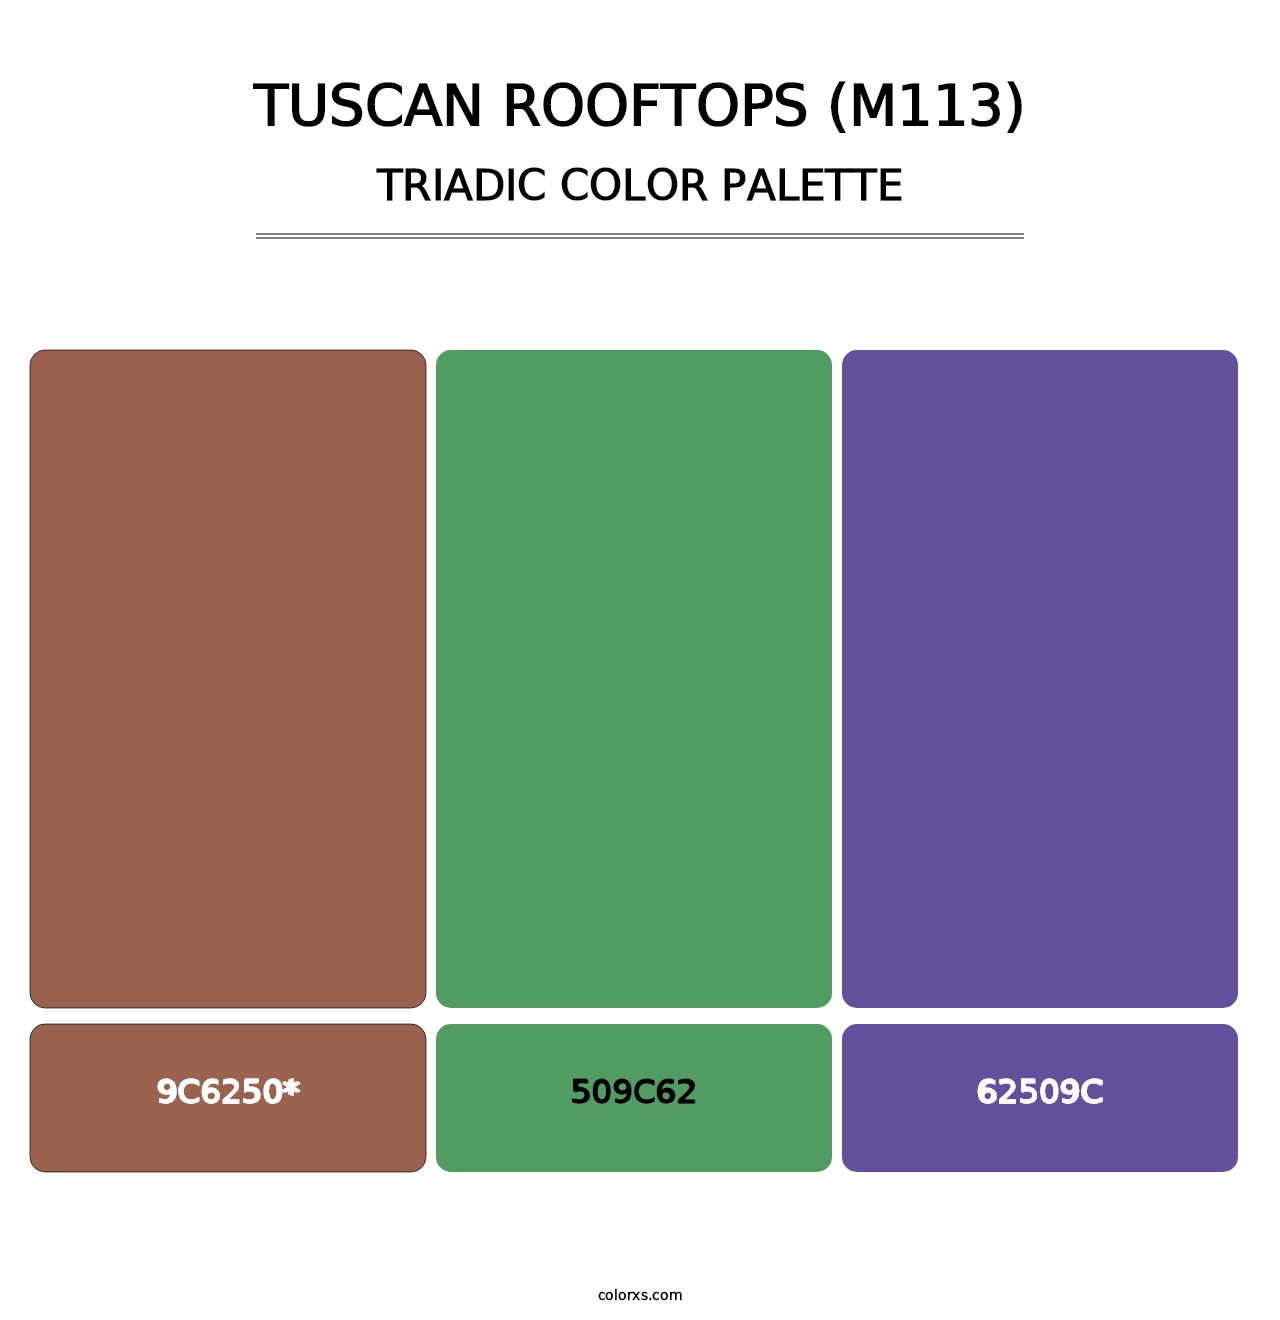 Tuscan Rooftops (M113) - Triadic Color Palette